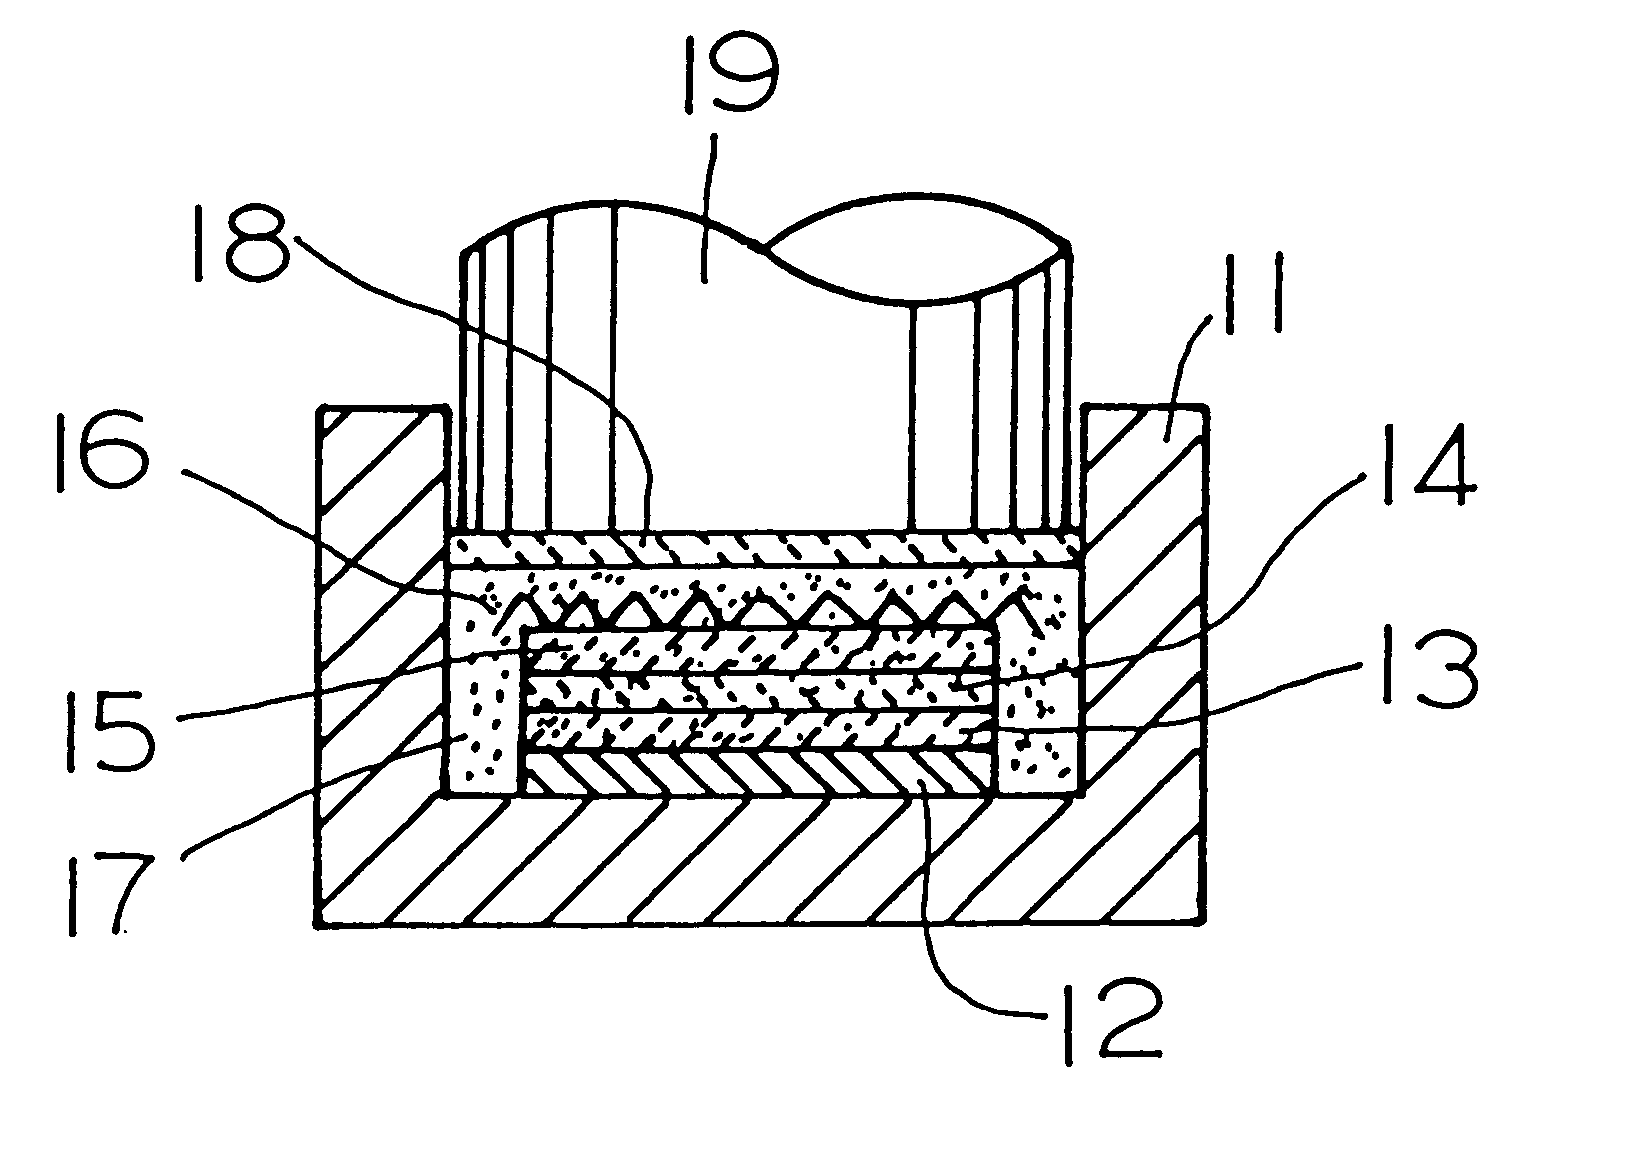 Super-abrasive grain-containing composite material and method of making